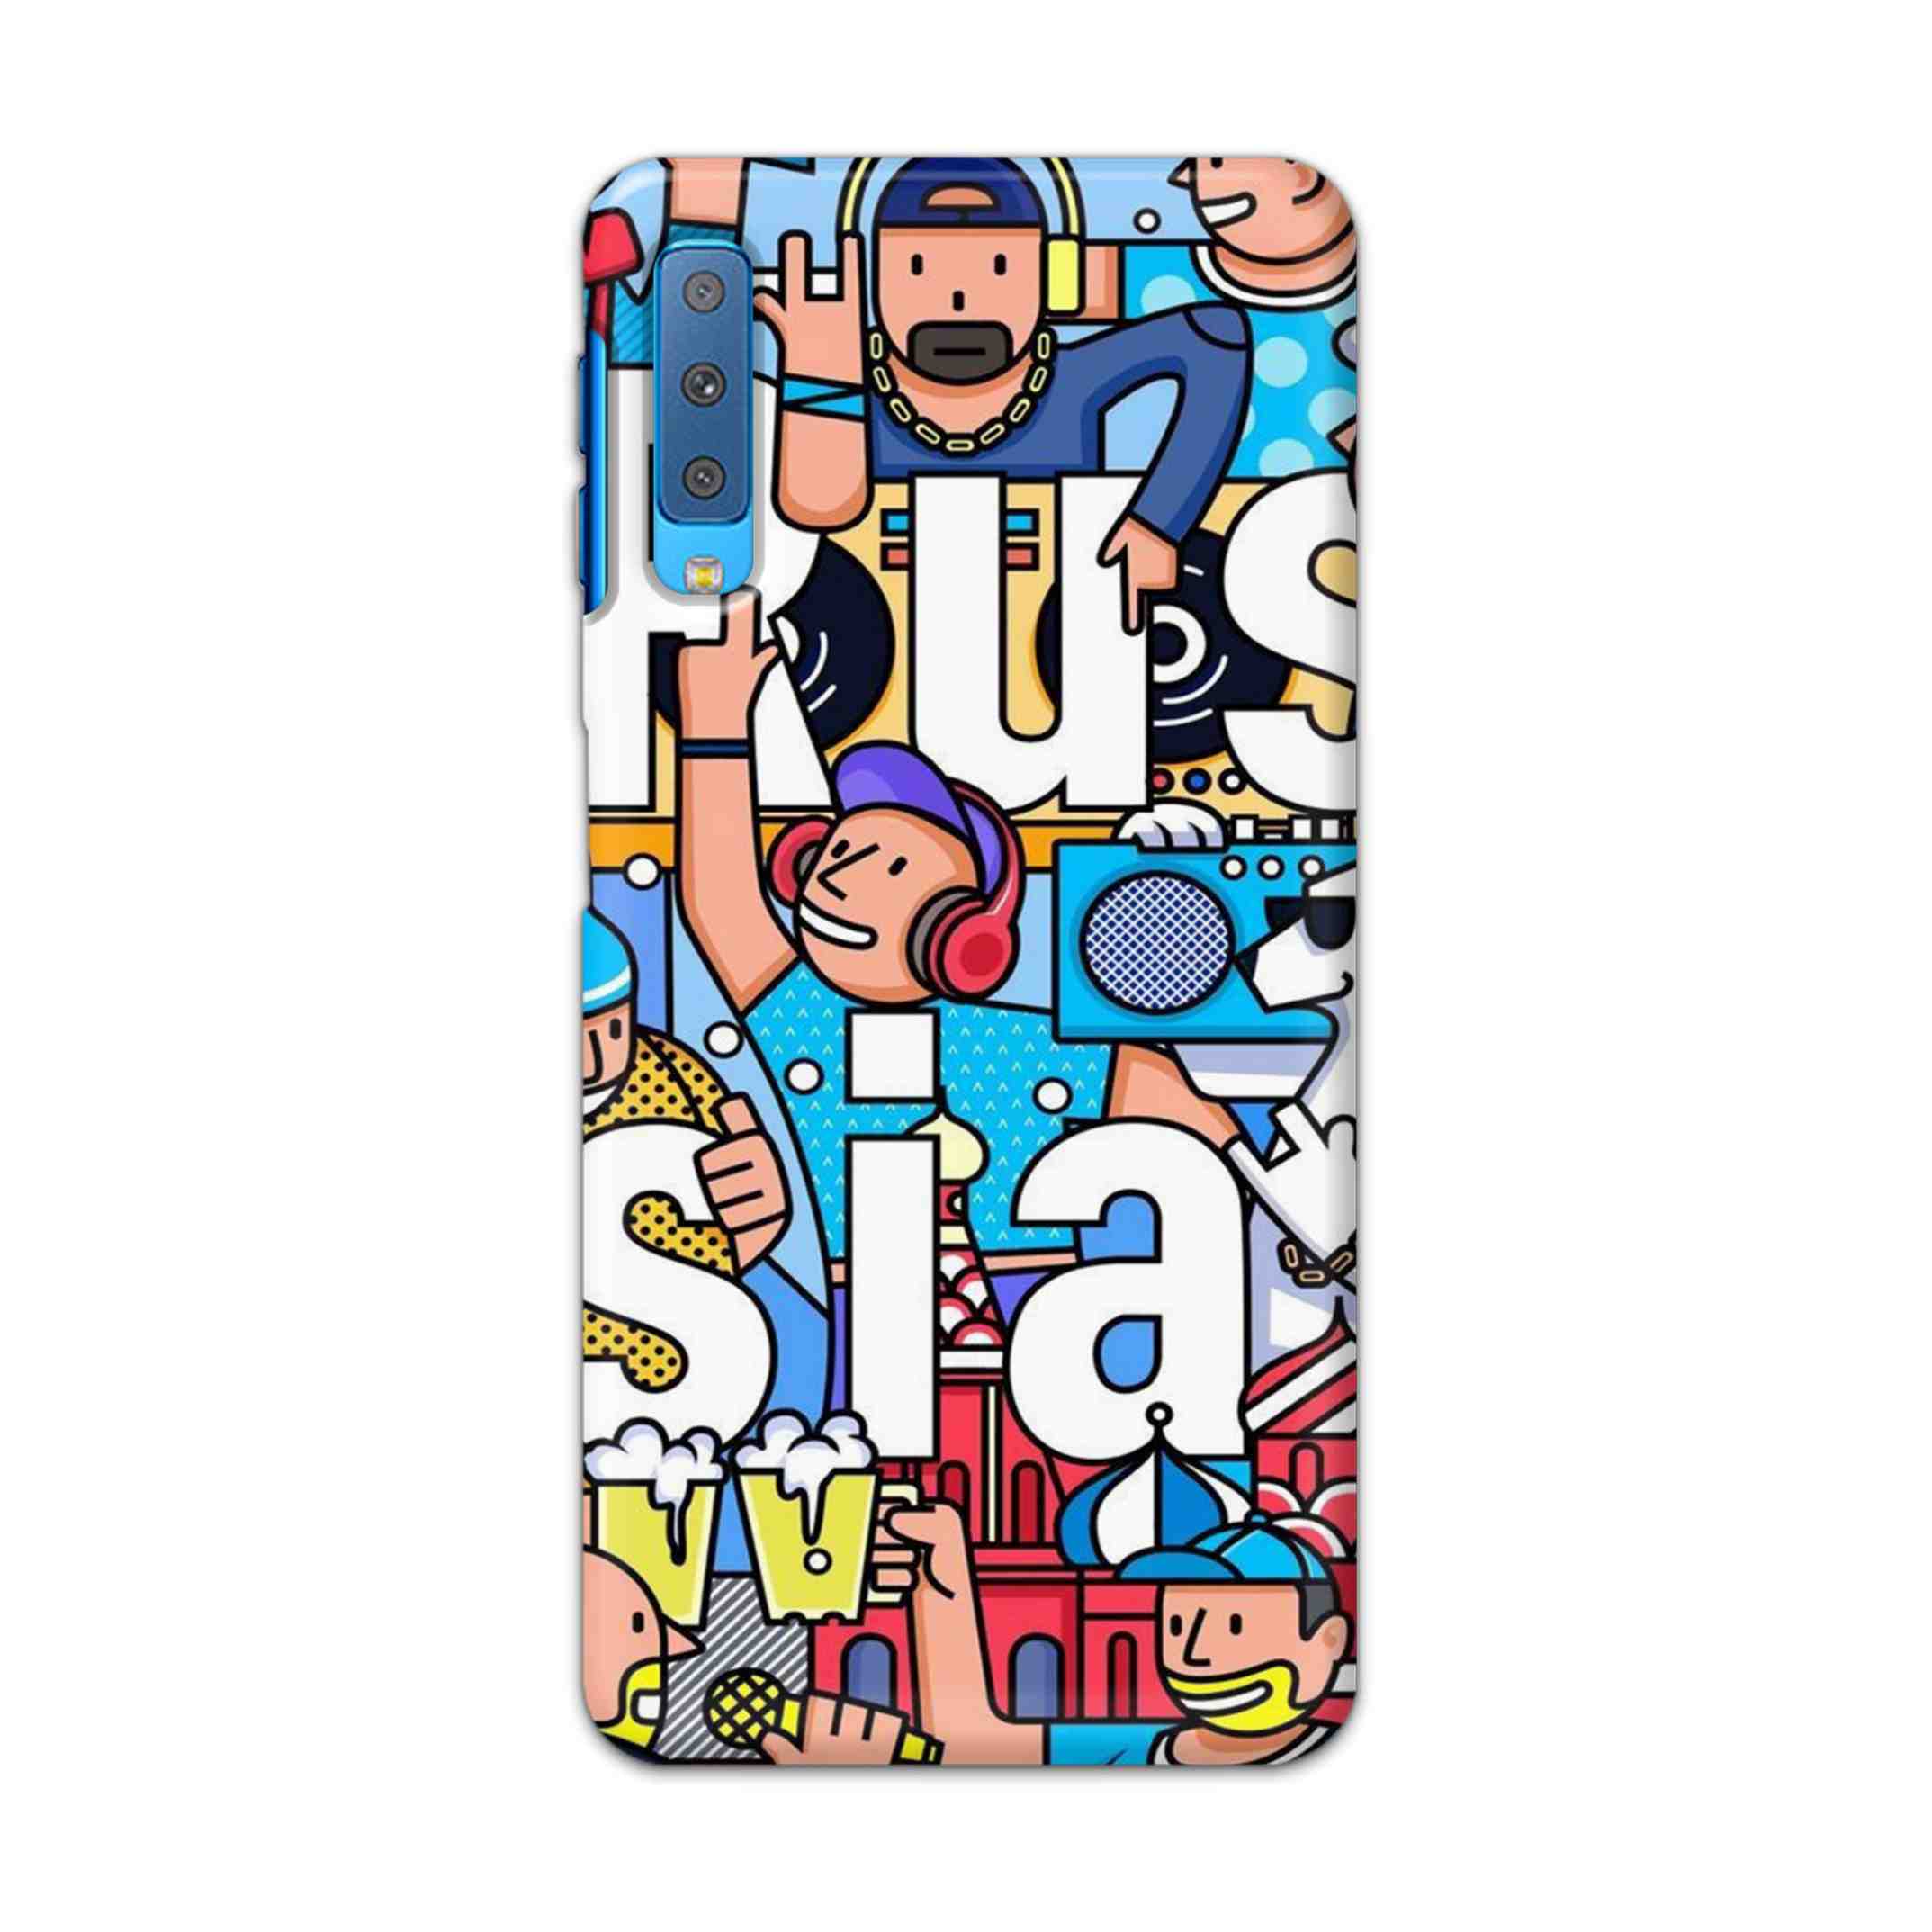 Buy Russia Hard Back Mobile Phone Case Cover For Samsung Galaxy A7 2018 Online